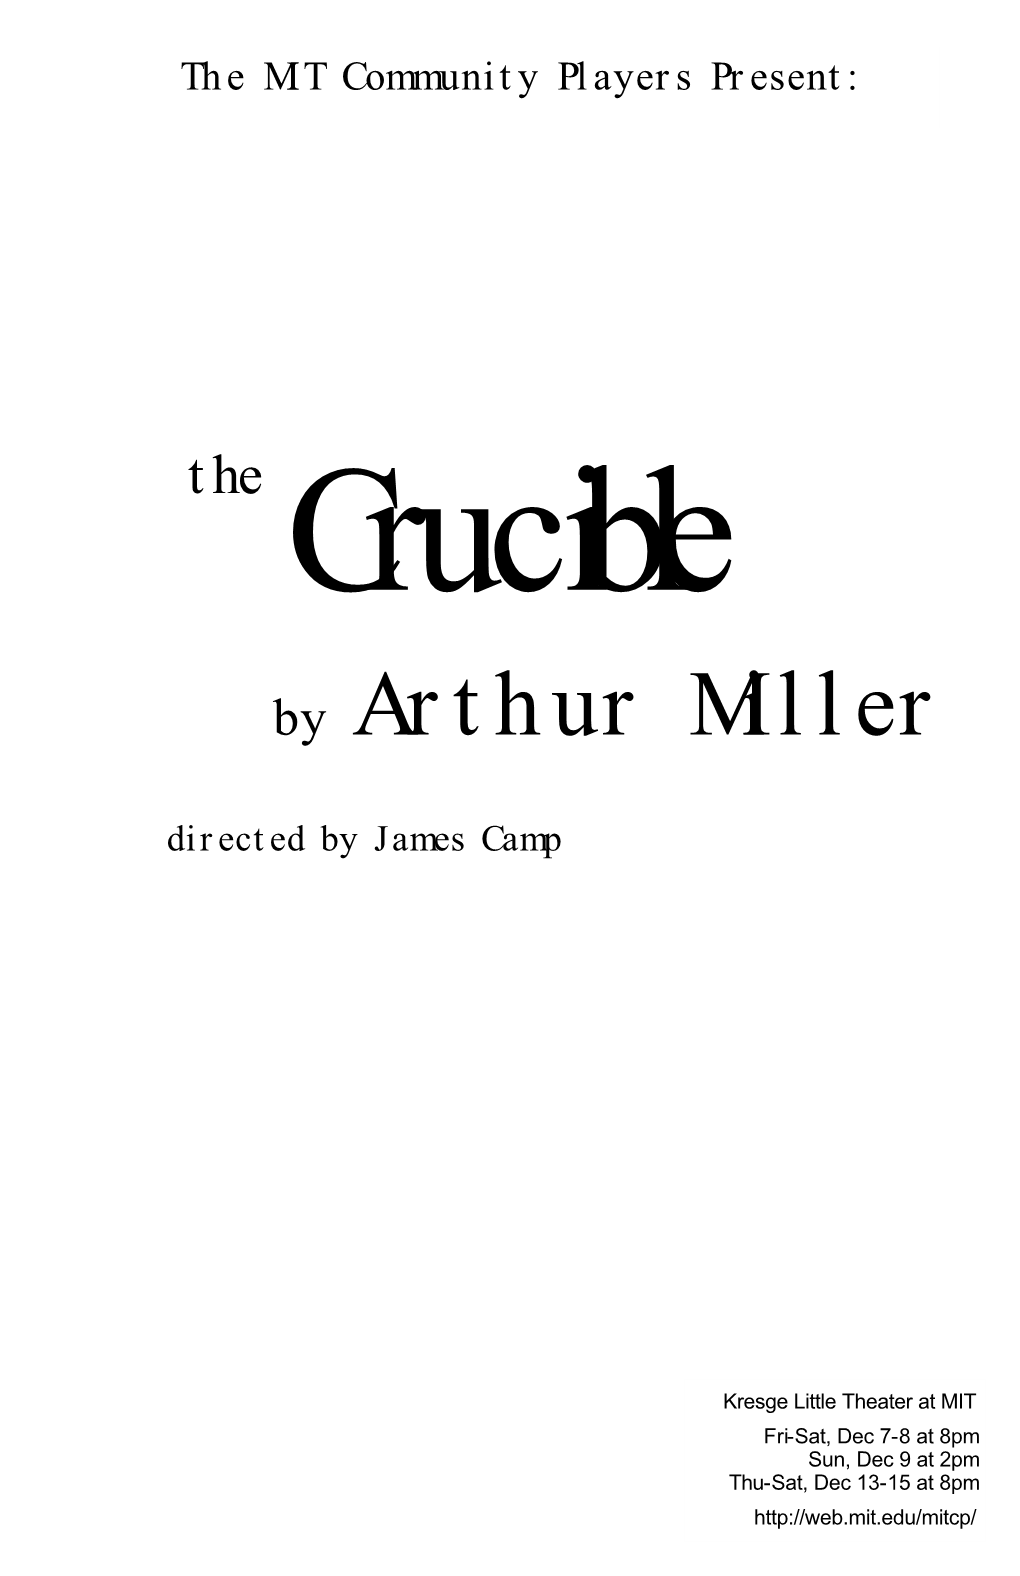 By Arthur Miller Directed by James Camp